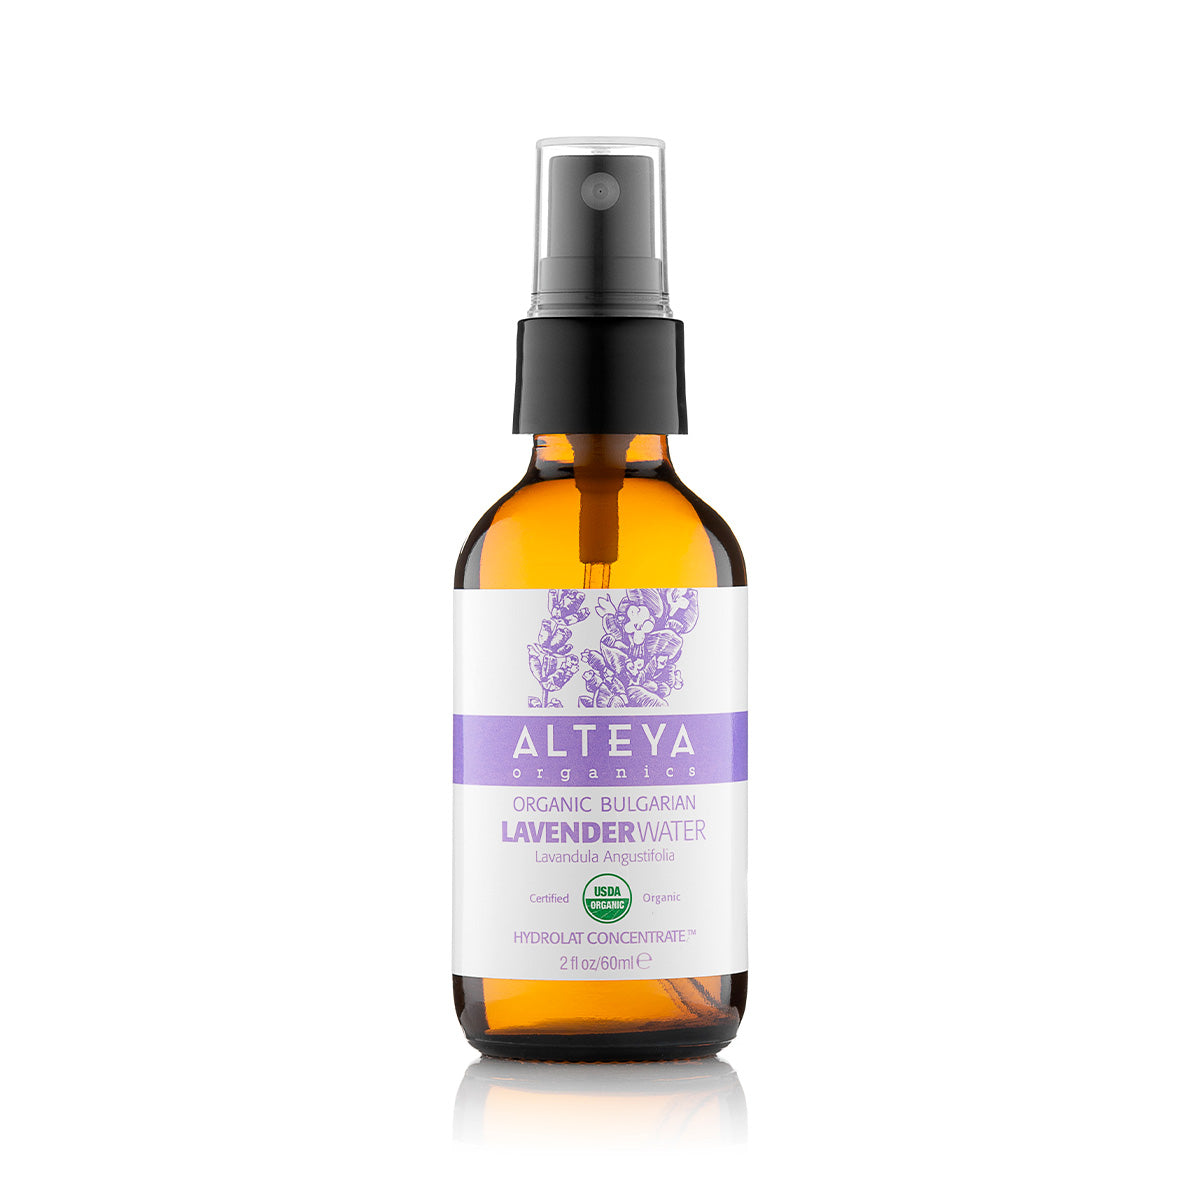 A bottle of USDA Certified Organic Lavender Water from Alteya Organics on a white background.